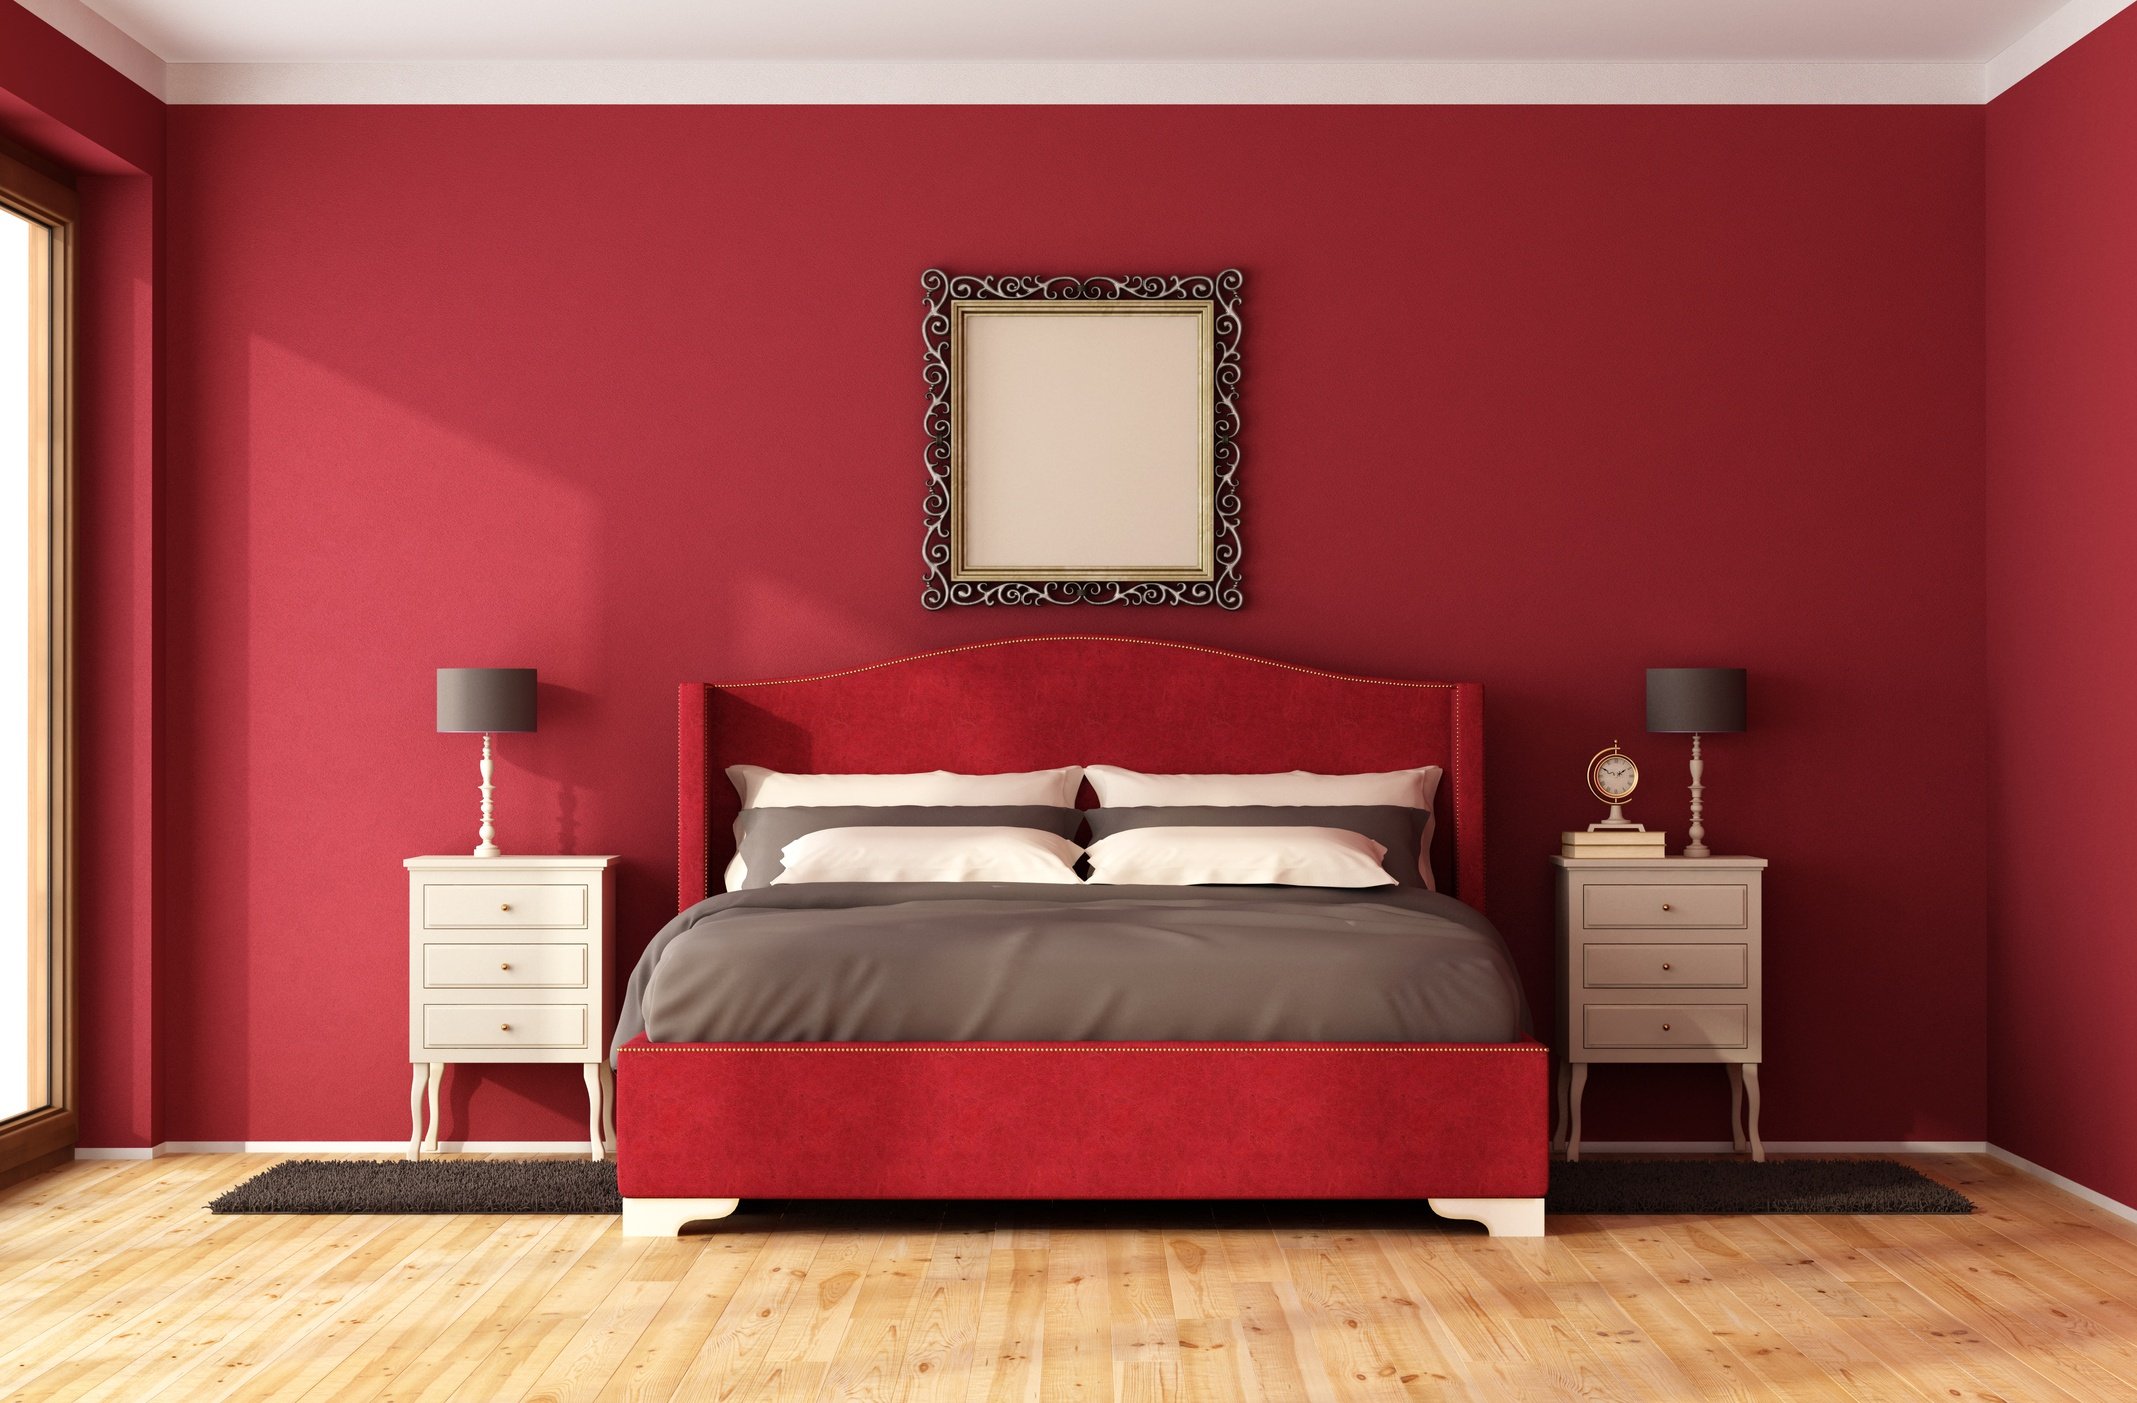 Red And Tan Bedroom Decor